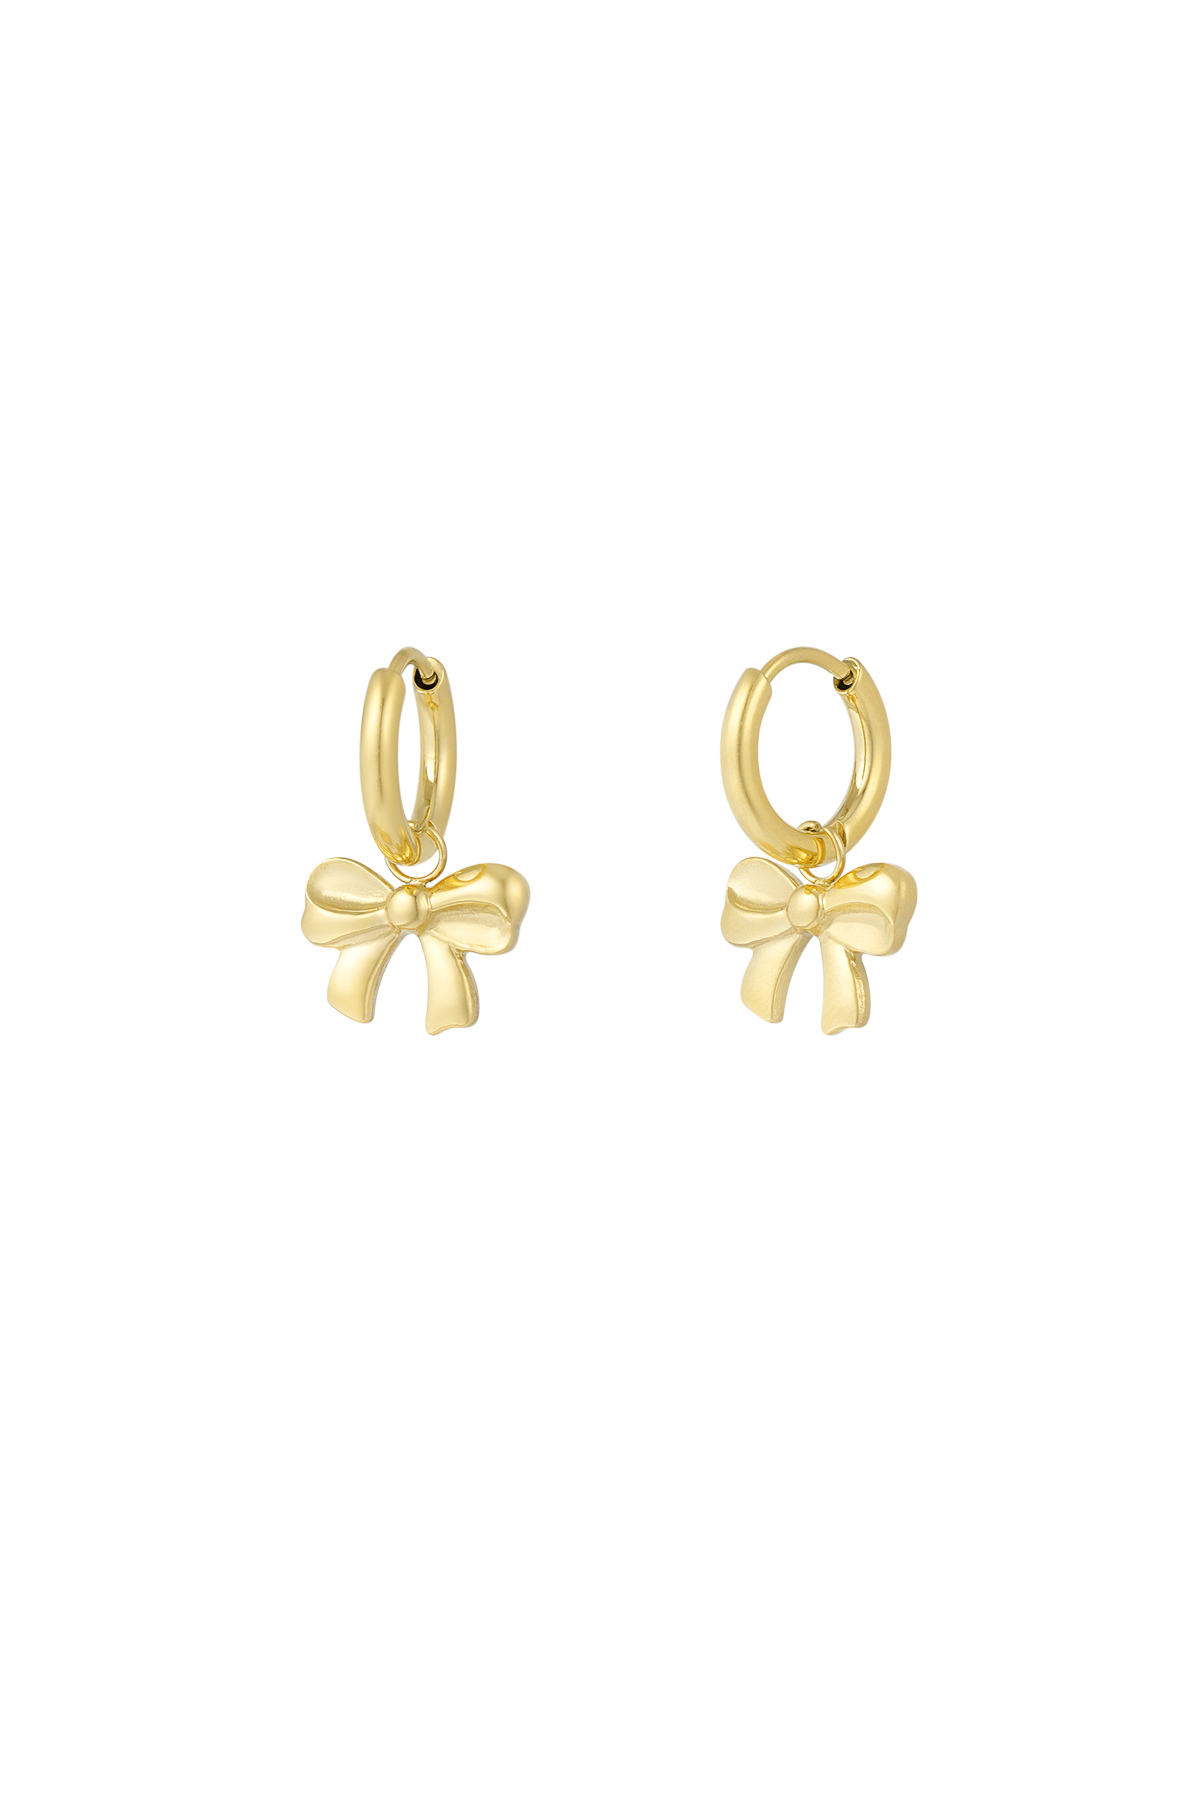 Earrings simple bow - gold h5 